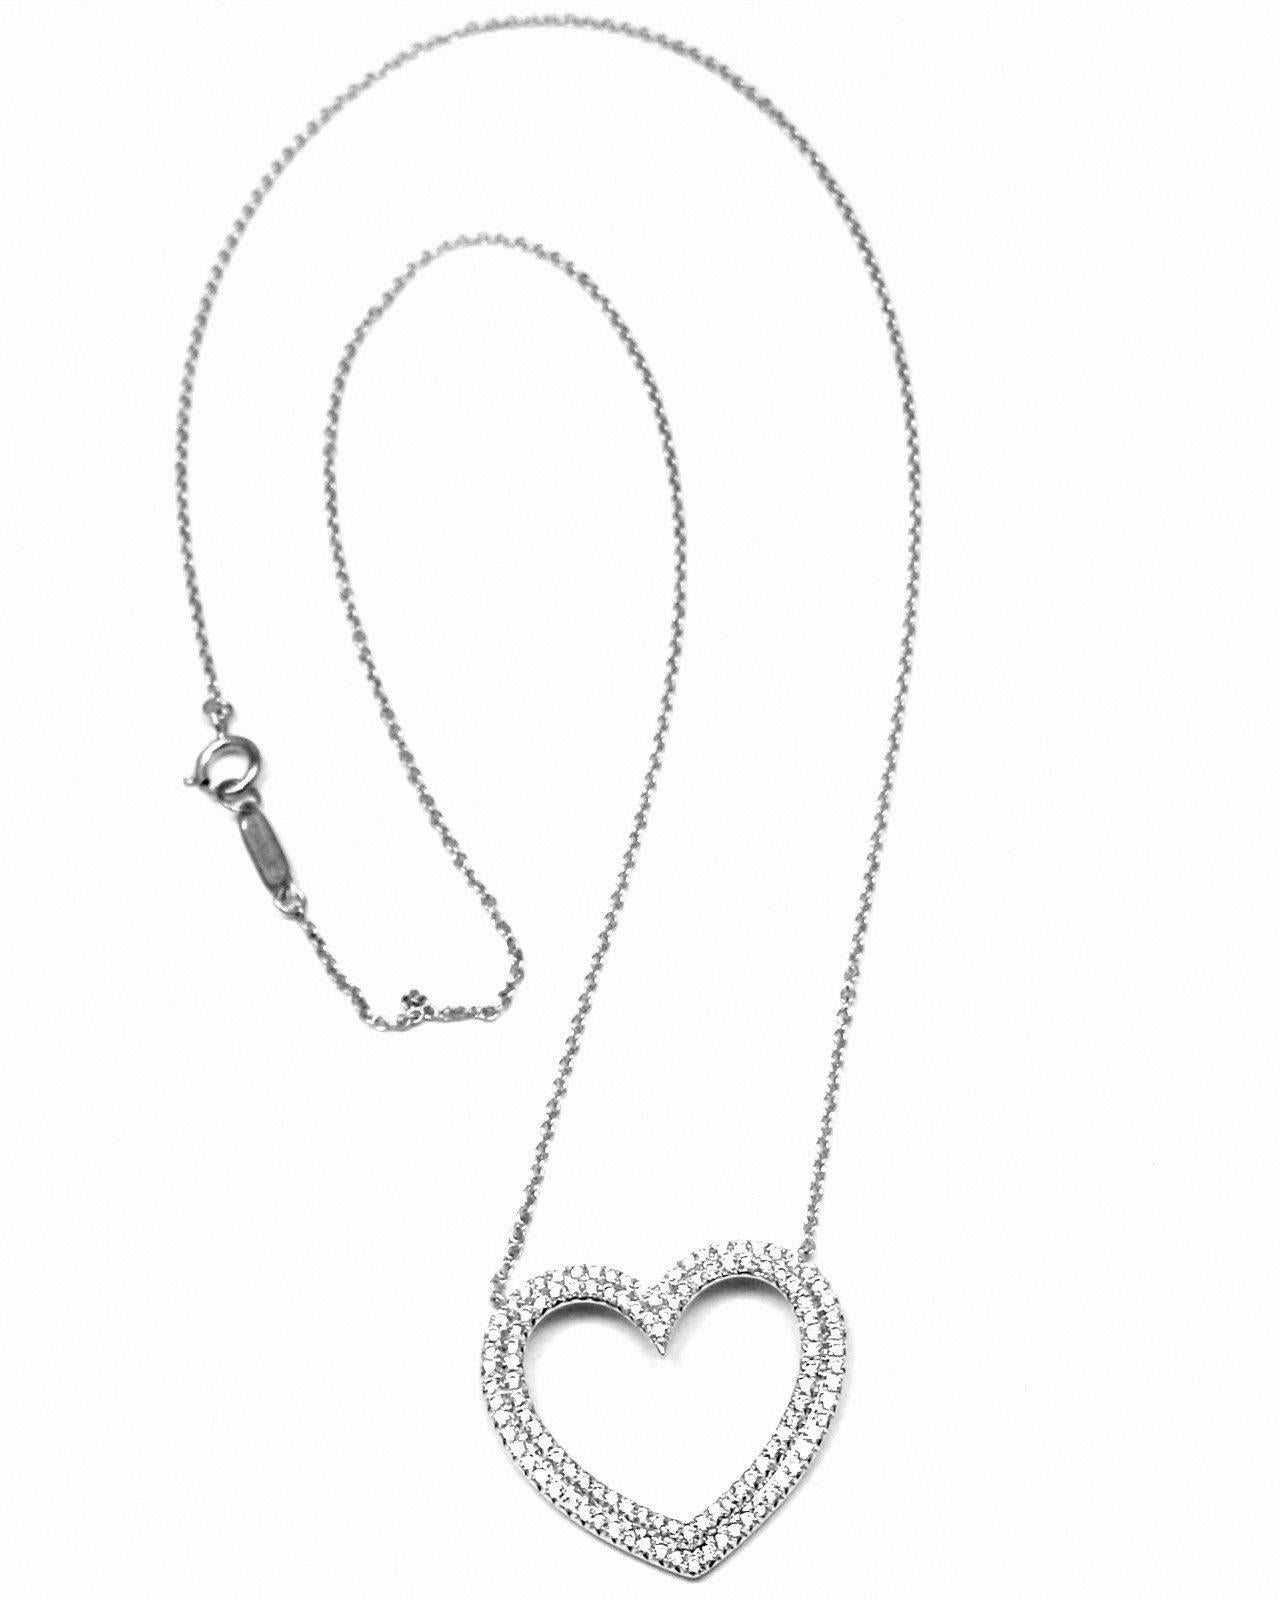 18k White Gold Metro Diamond Large Heart Pendant Necklace by Tiffany & Co.
With round diamonds VS1 clarity, G color total weight approx. .50ct
This necklace comes with Tiffany & Co. box.
Details:
Length: 17.5